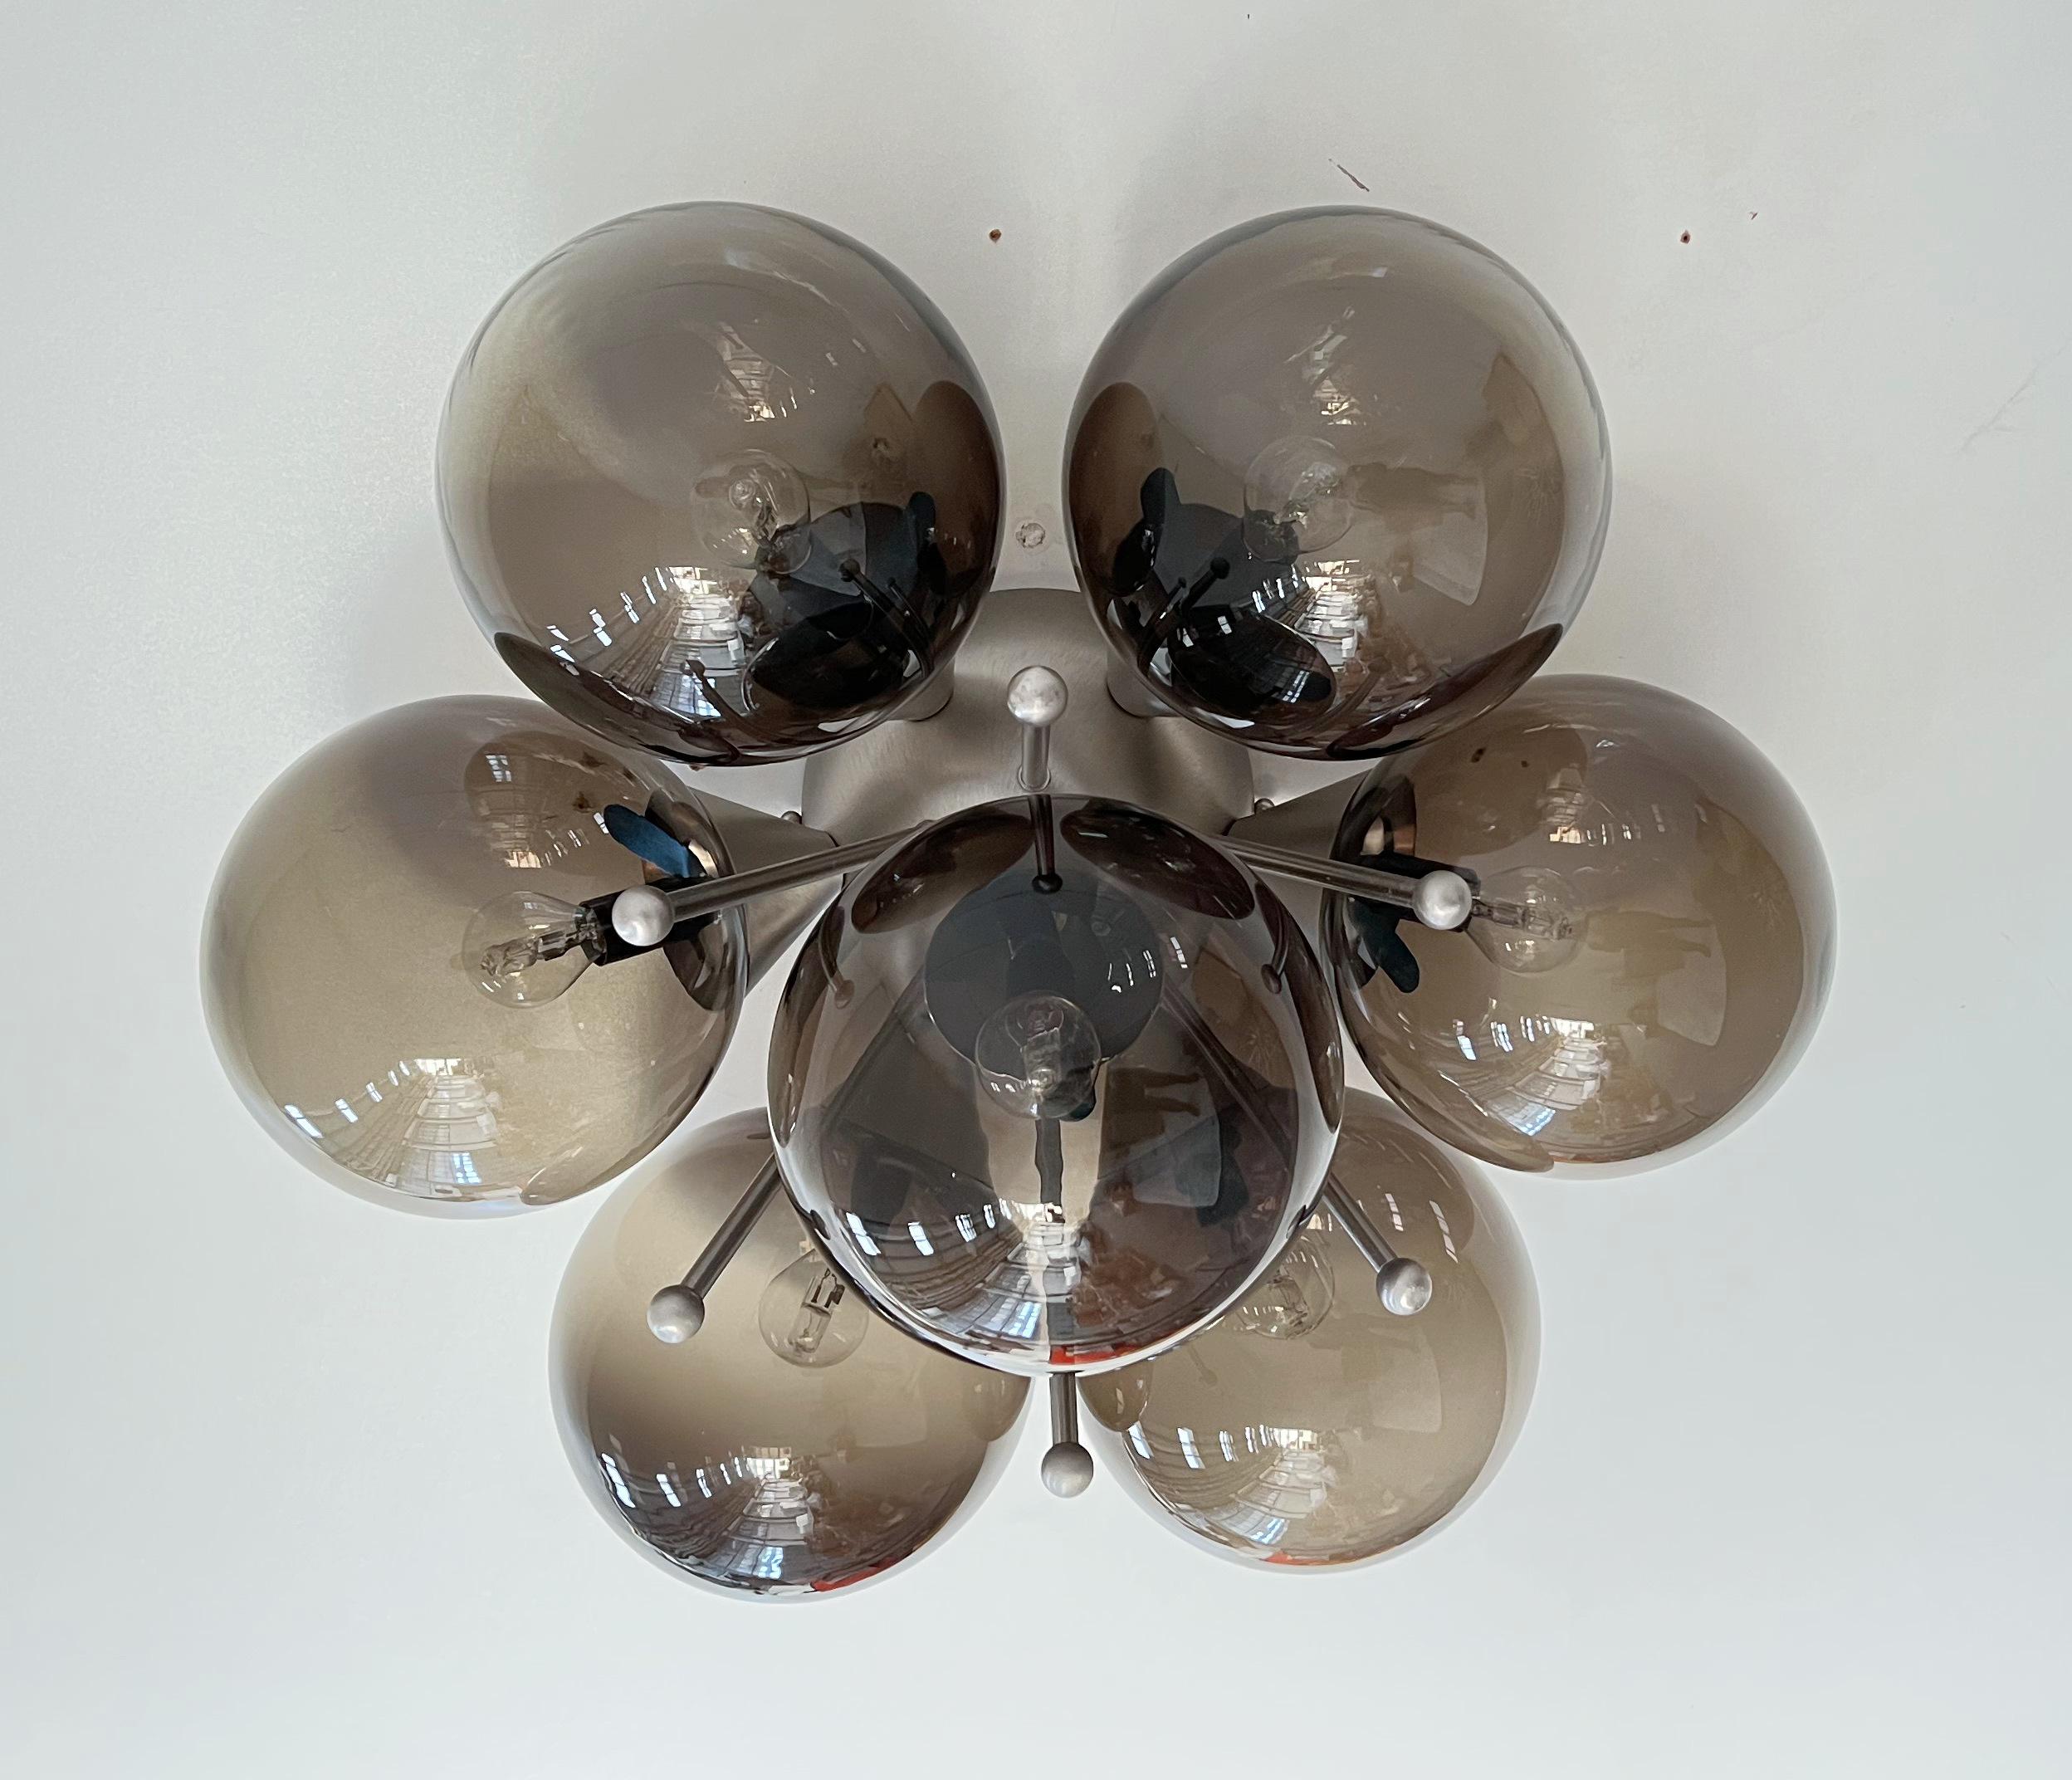 Italian flush mount with large Murano glass globes mounted on solid brass frame in satin nickel finish
Designed by Fabio Bergomi / Made in Italy
7 lights / E12 or E14 type / max 40W each
Measures: Diameter 25.5 inches / height 14 inches
Order only /